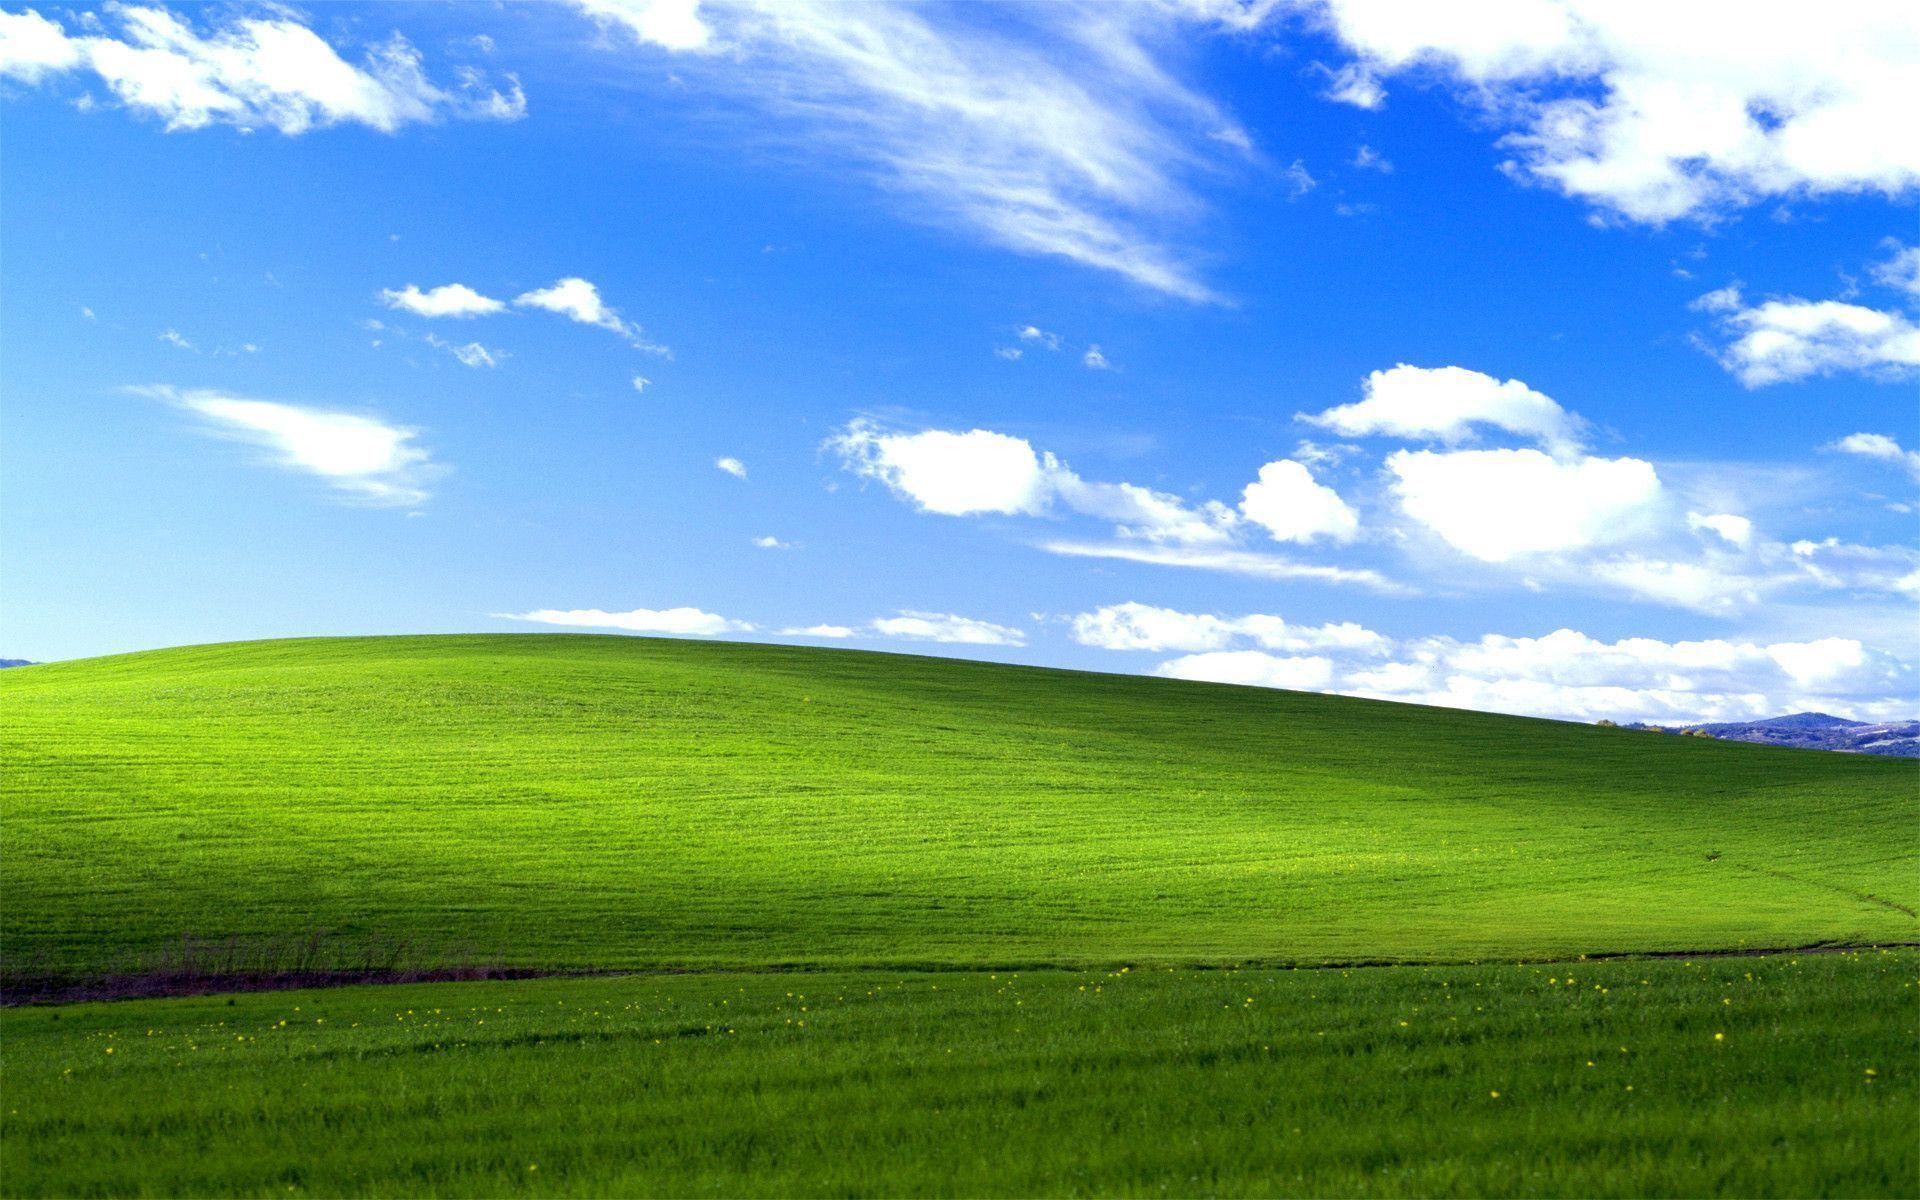 Support for Windows XP and Office 2003 ends April 8, 2014